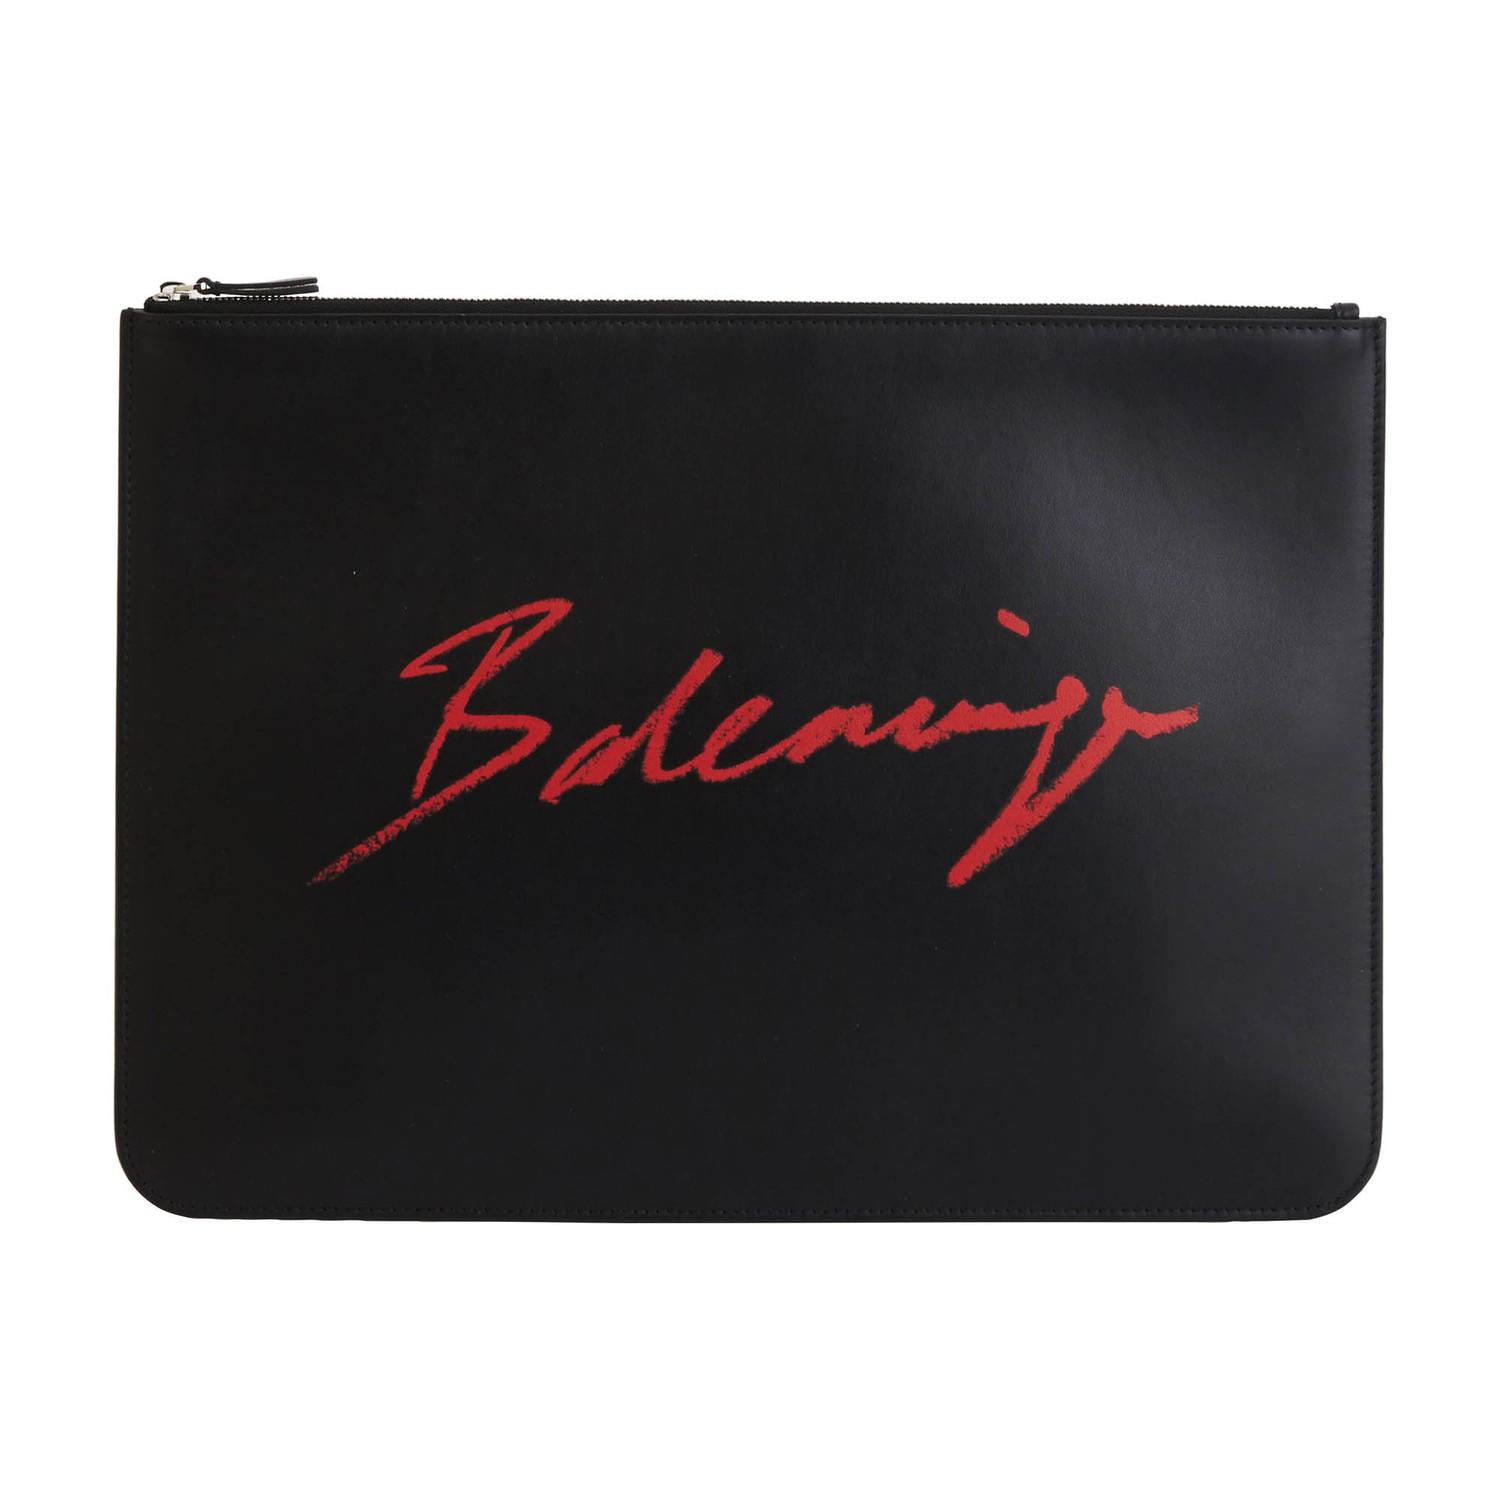 Balenciaga Signature Everyday L Leather Clutch Bag in Black for Men - Lyst